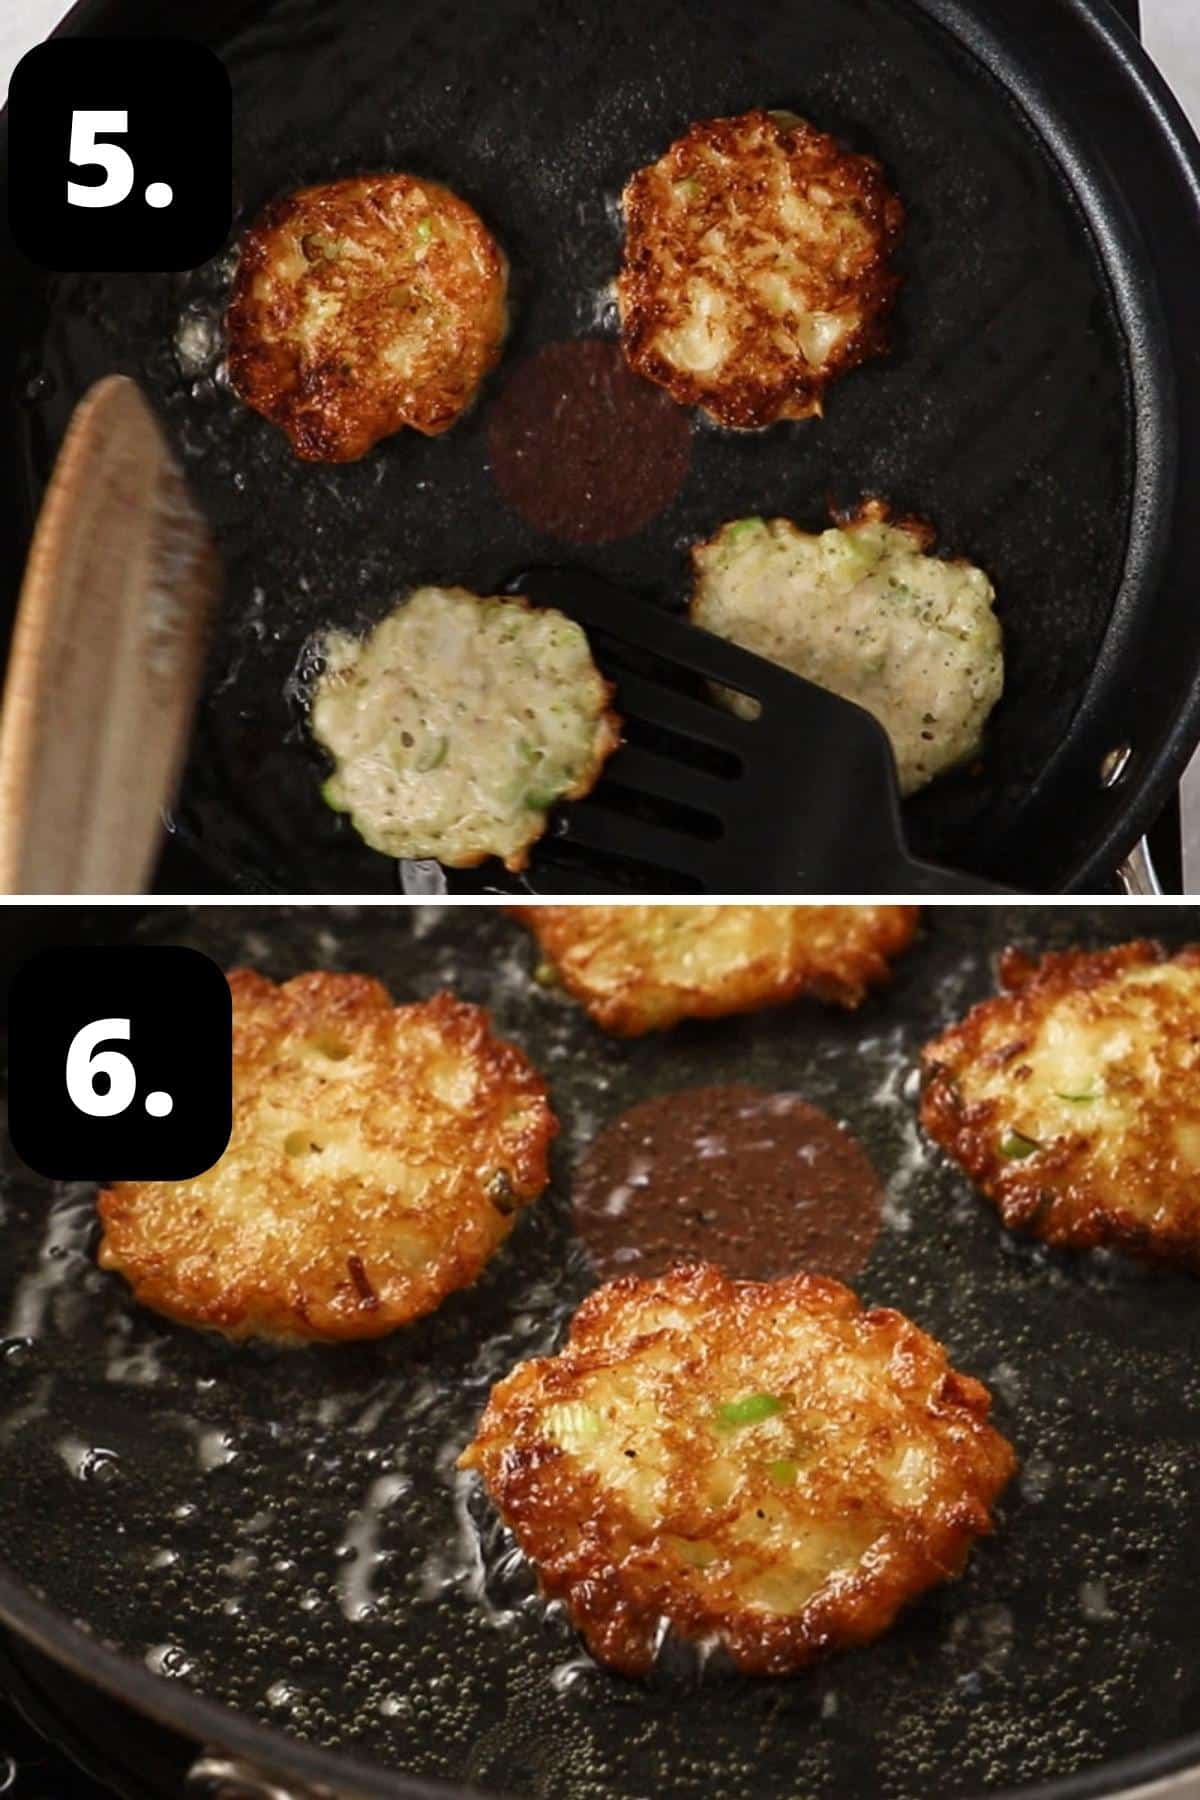 Steps 5-6 of preparing this recipe - flipping the fritters in the frying pan and the cooked patties ready to be removed.